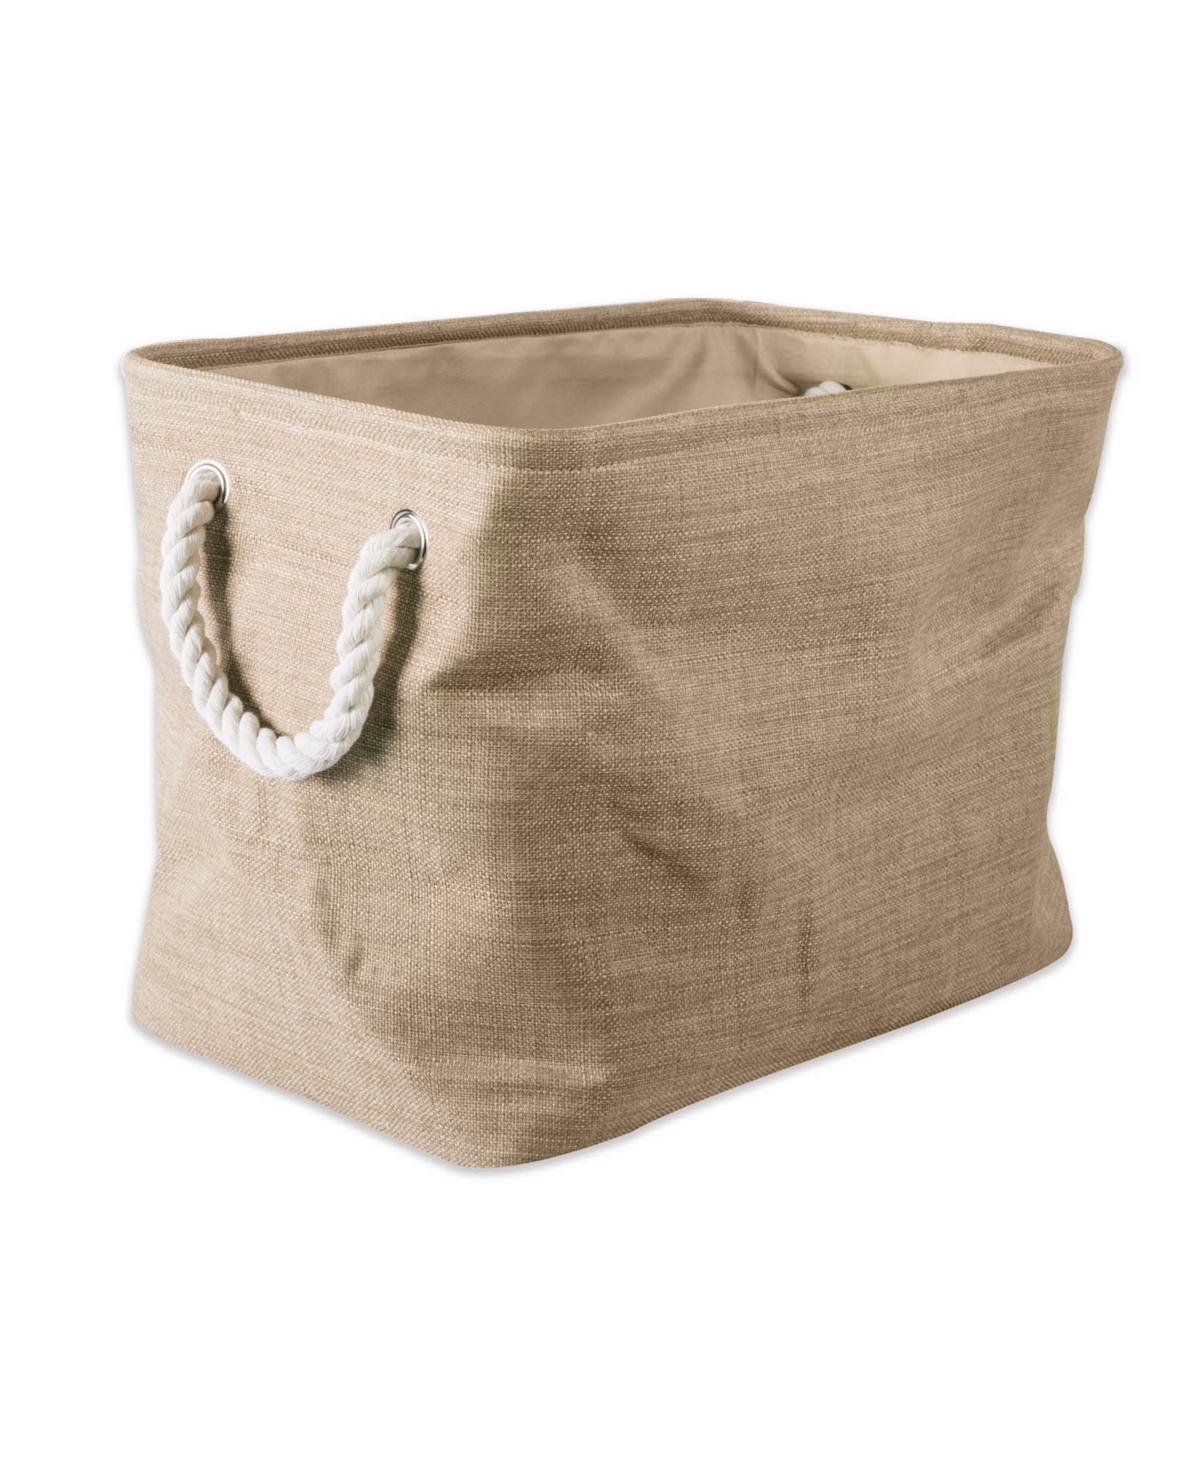 Design Imports Polyester Bin Variegated Rectangle Large In Taupe